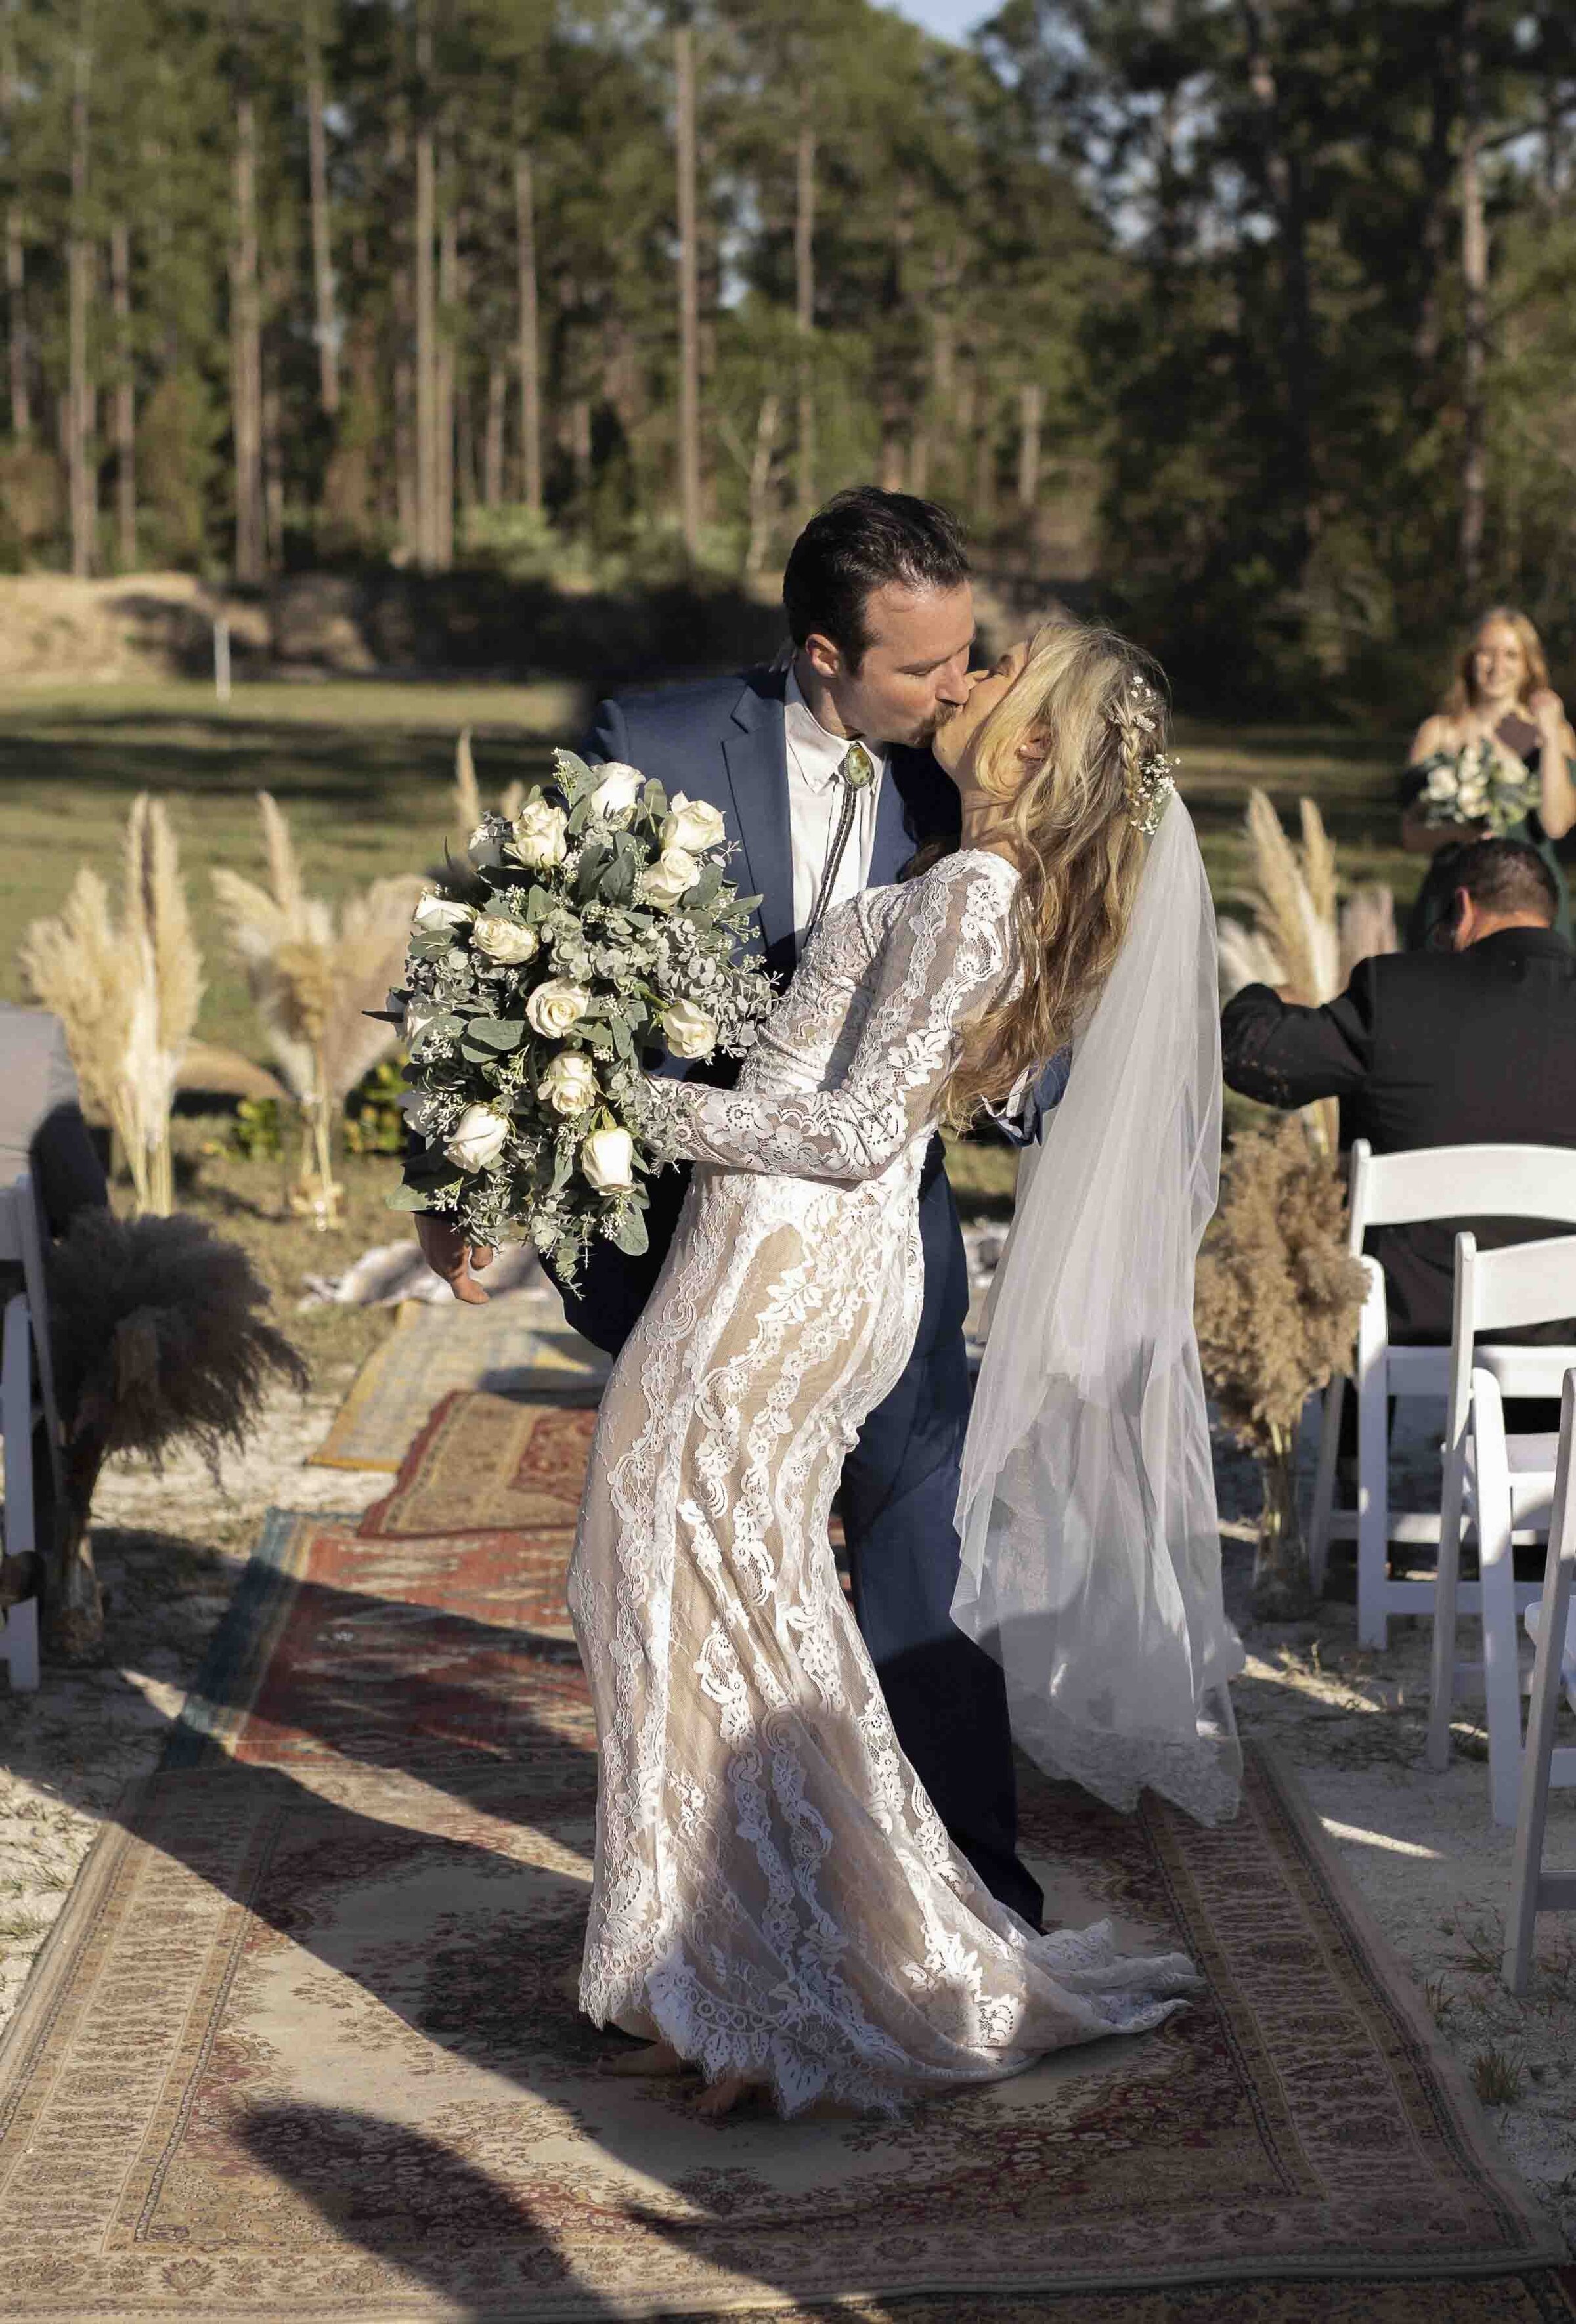 Bride and groom kissing at an outdoor wedding